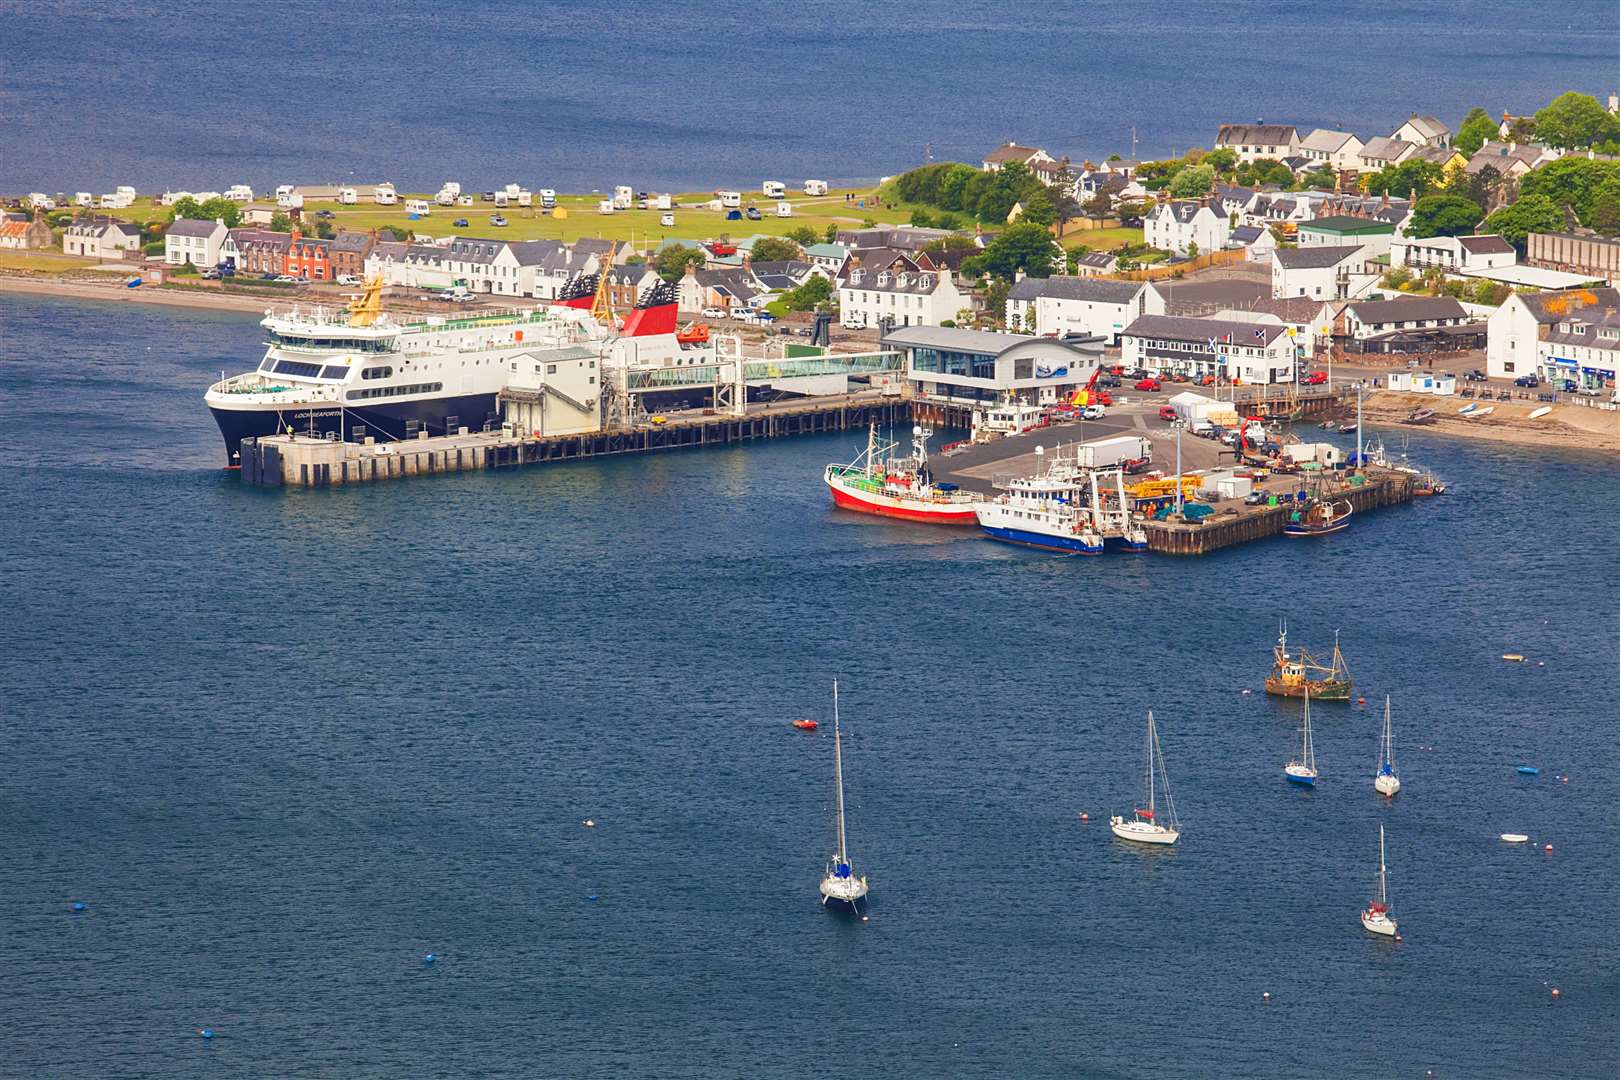 Ullapool is home to a popular annual book festival.